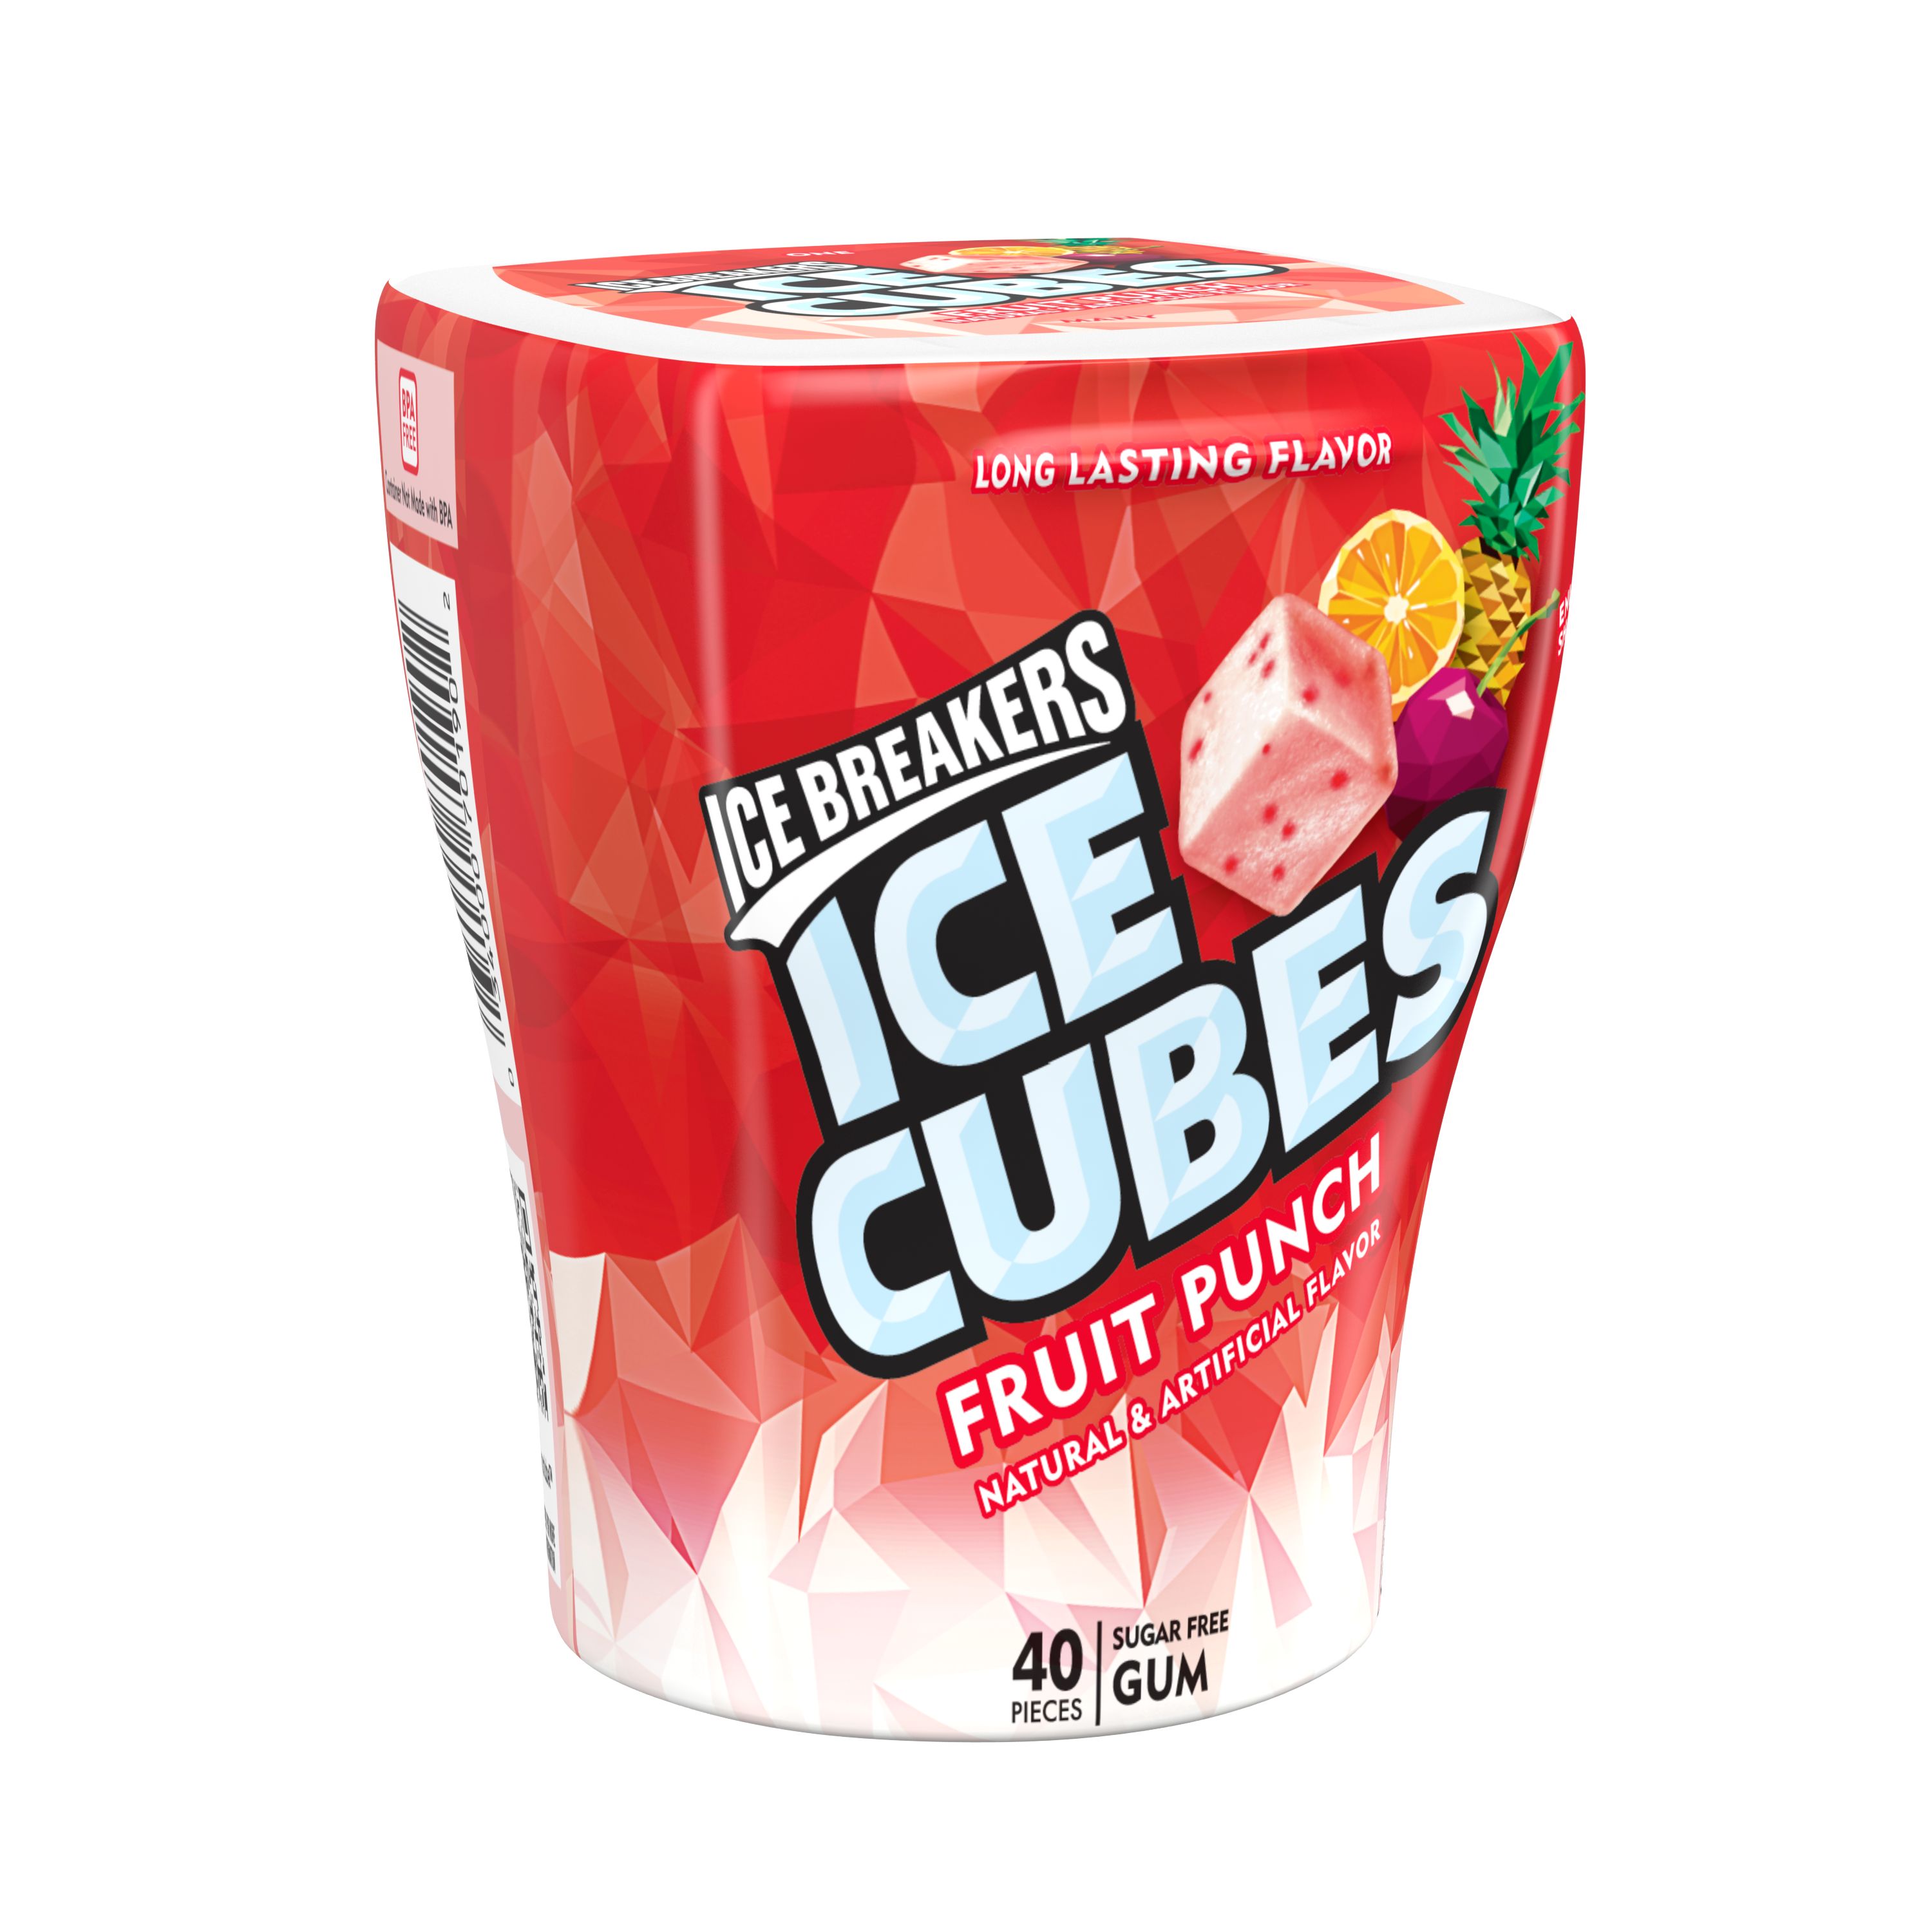 Ice Breakers Ice Cubes Sugar Free Fruit Punch Gum, 40 Pieces, 3.24 OZ